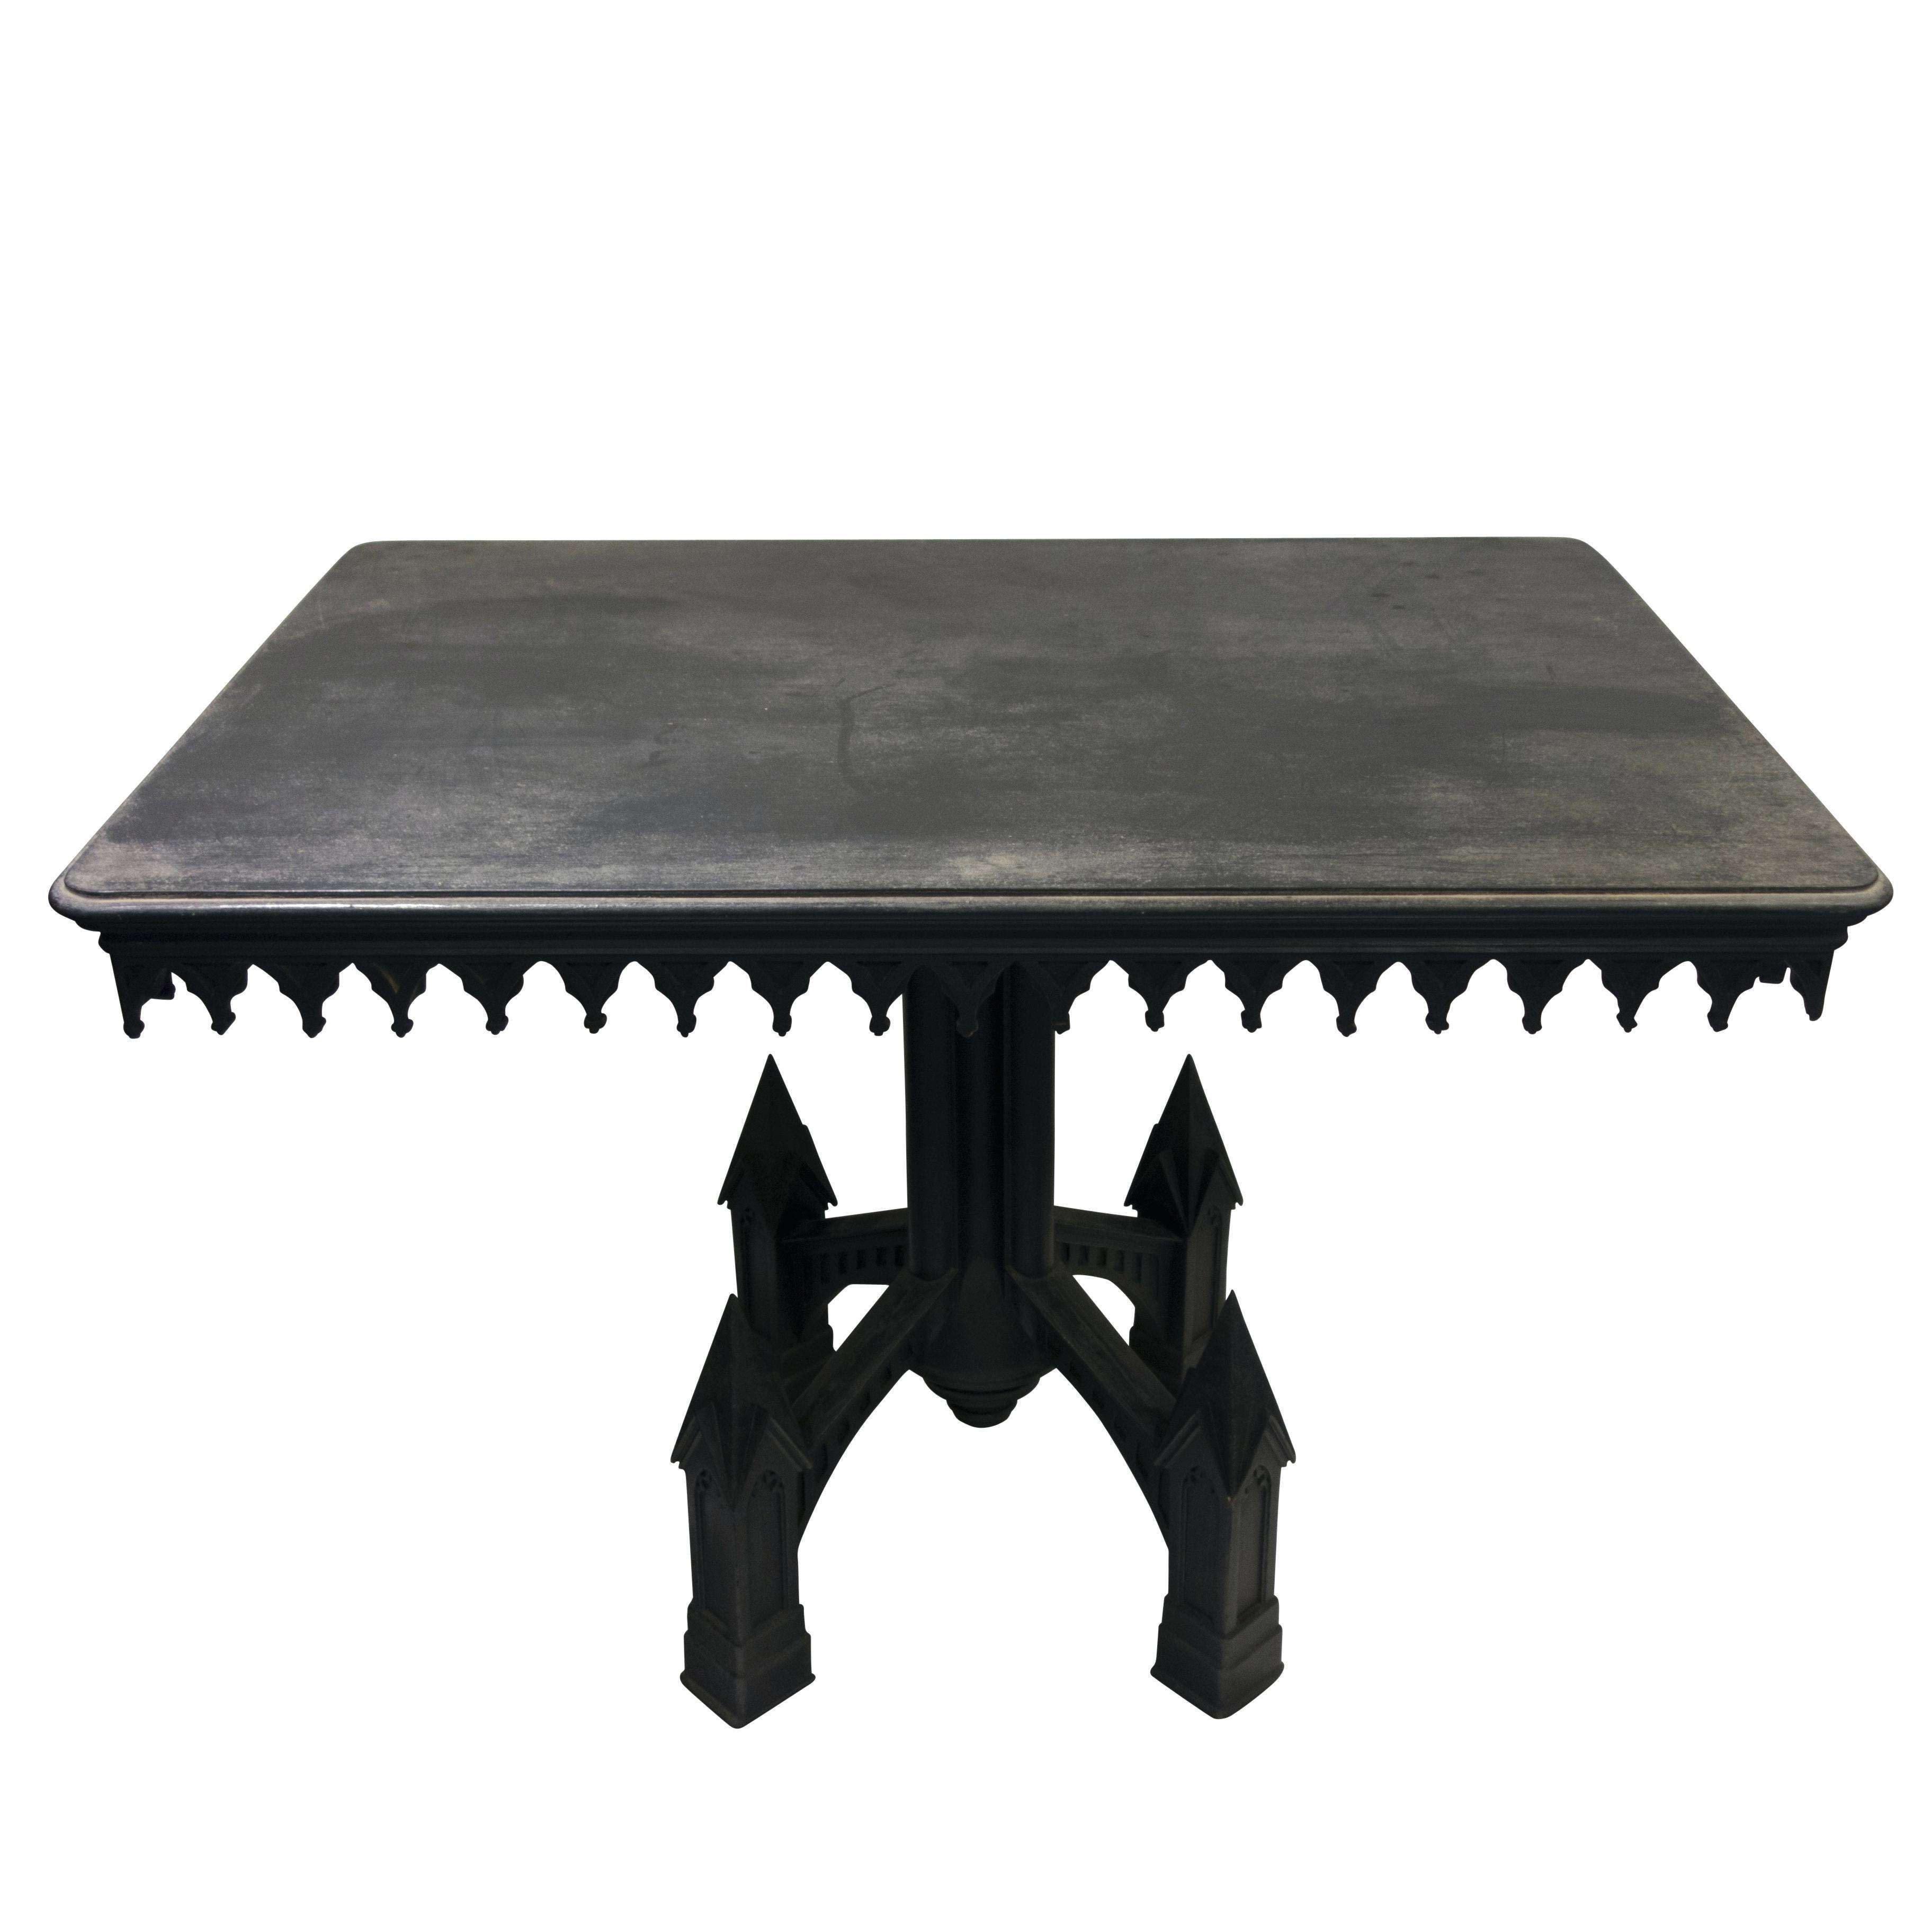 Gothic Coffee Table Fit For Home Design Full Size Of Coffin E Throughout Recent Dragon Coffee Tables (View 16 of 20)